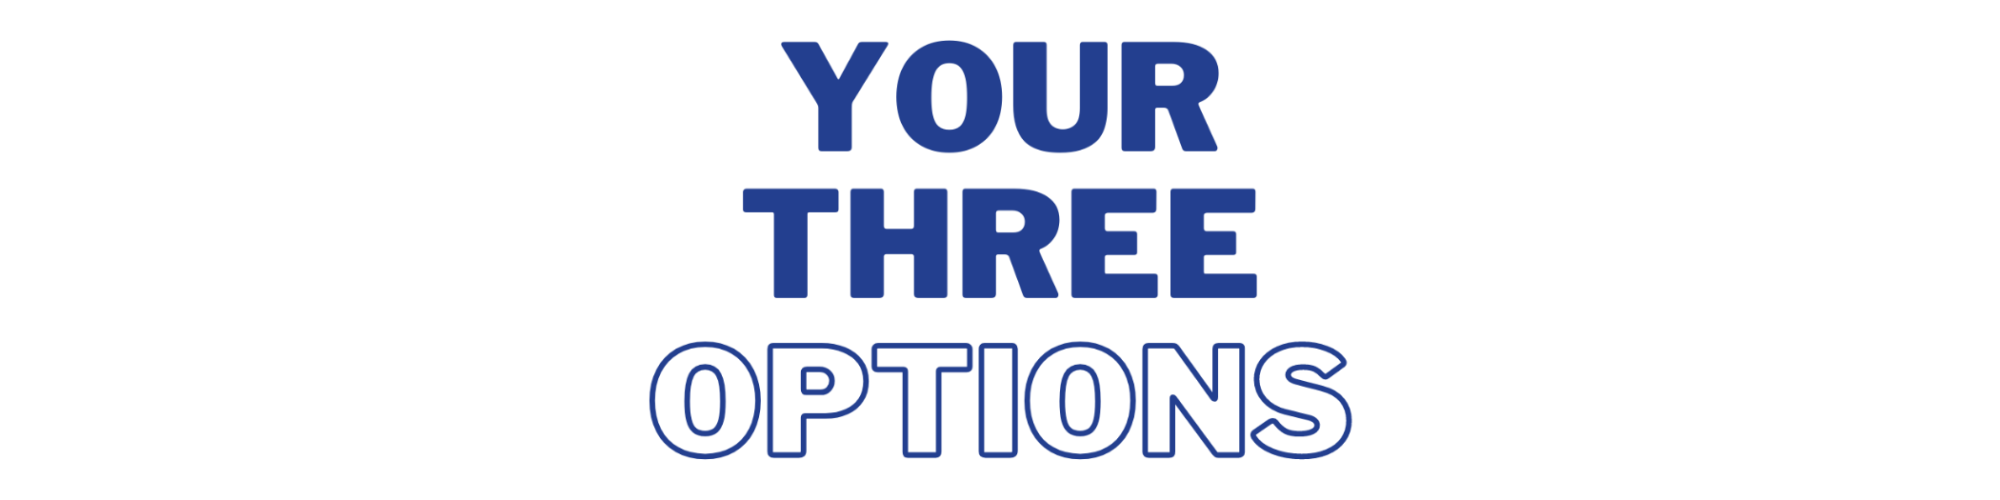 Your Three Options Title